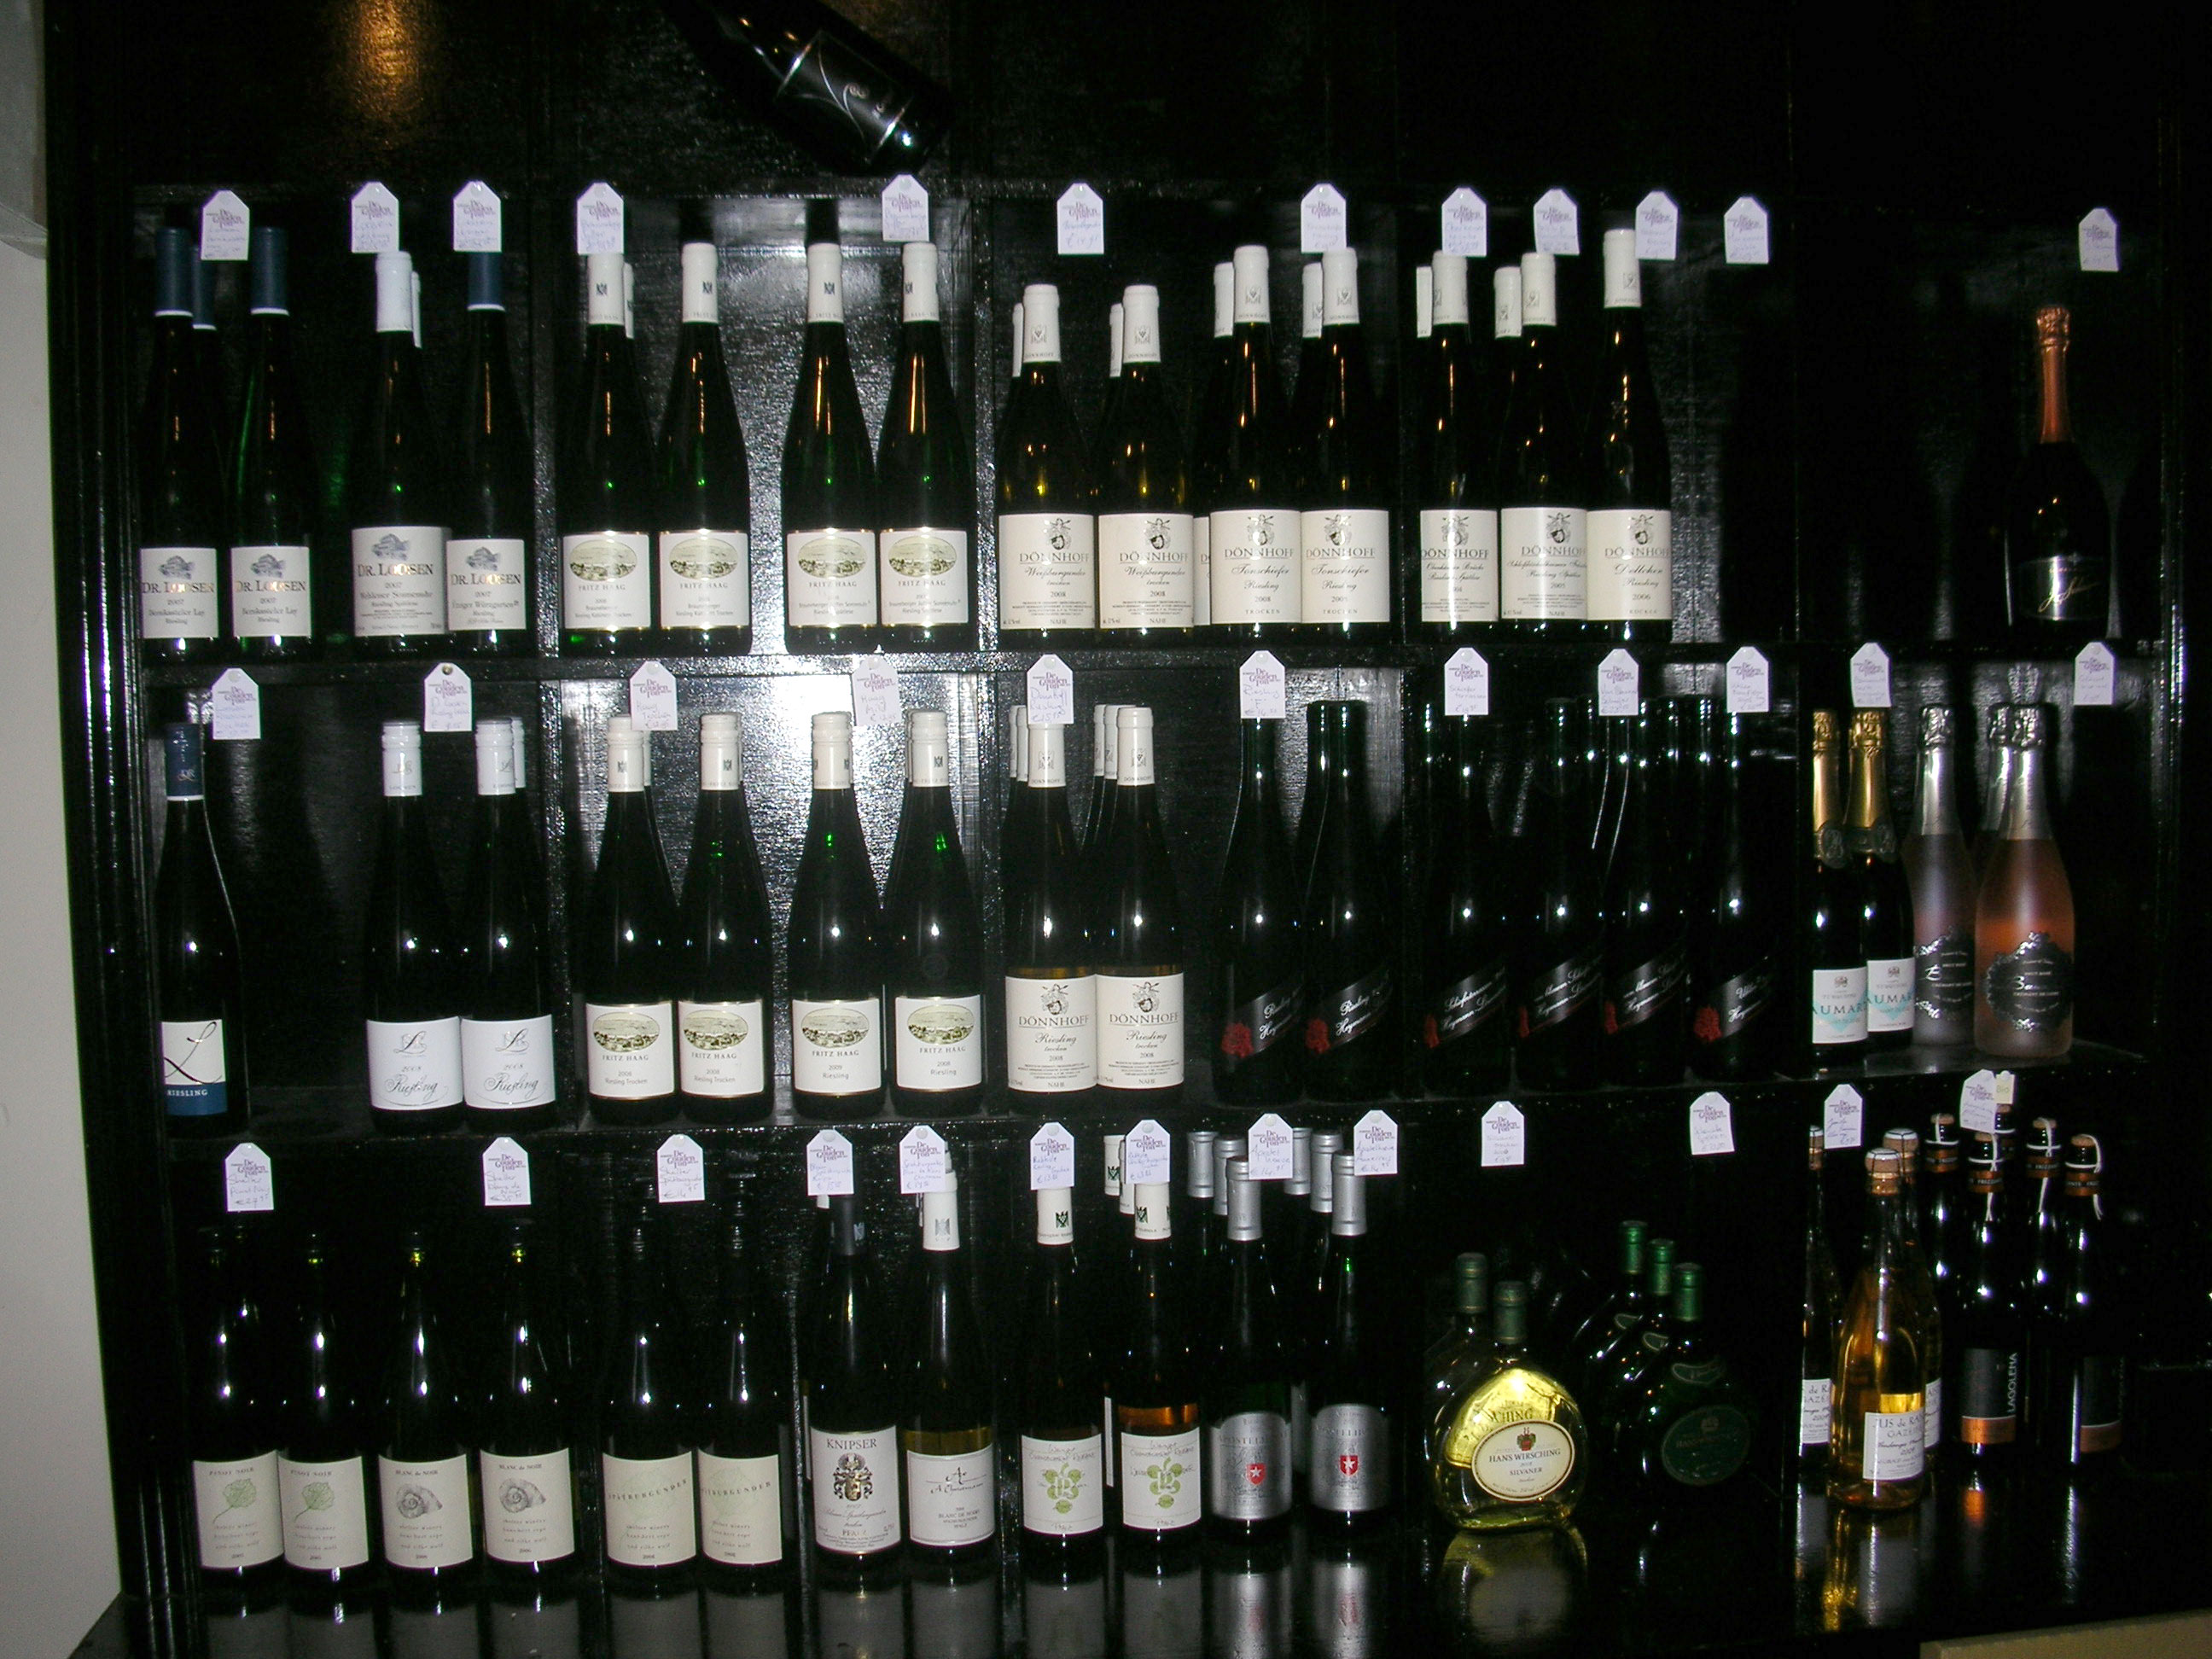 The Wall of German wine